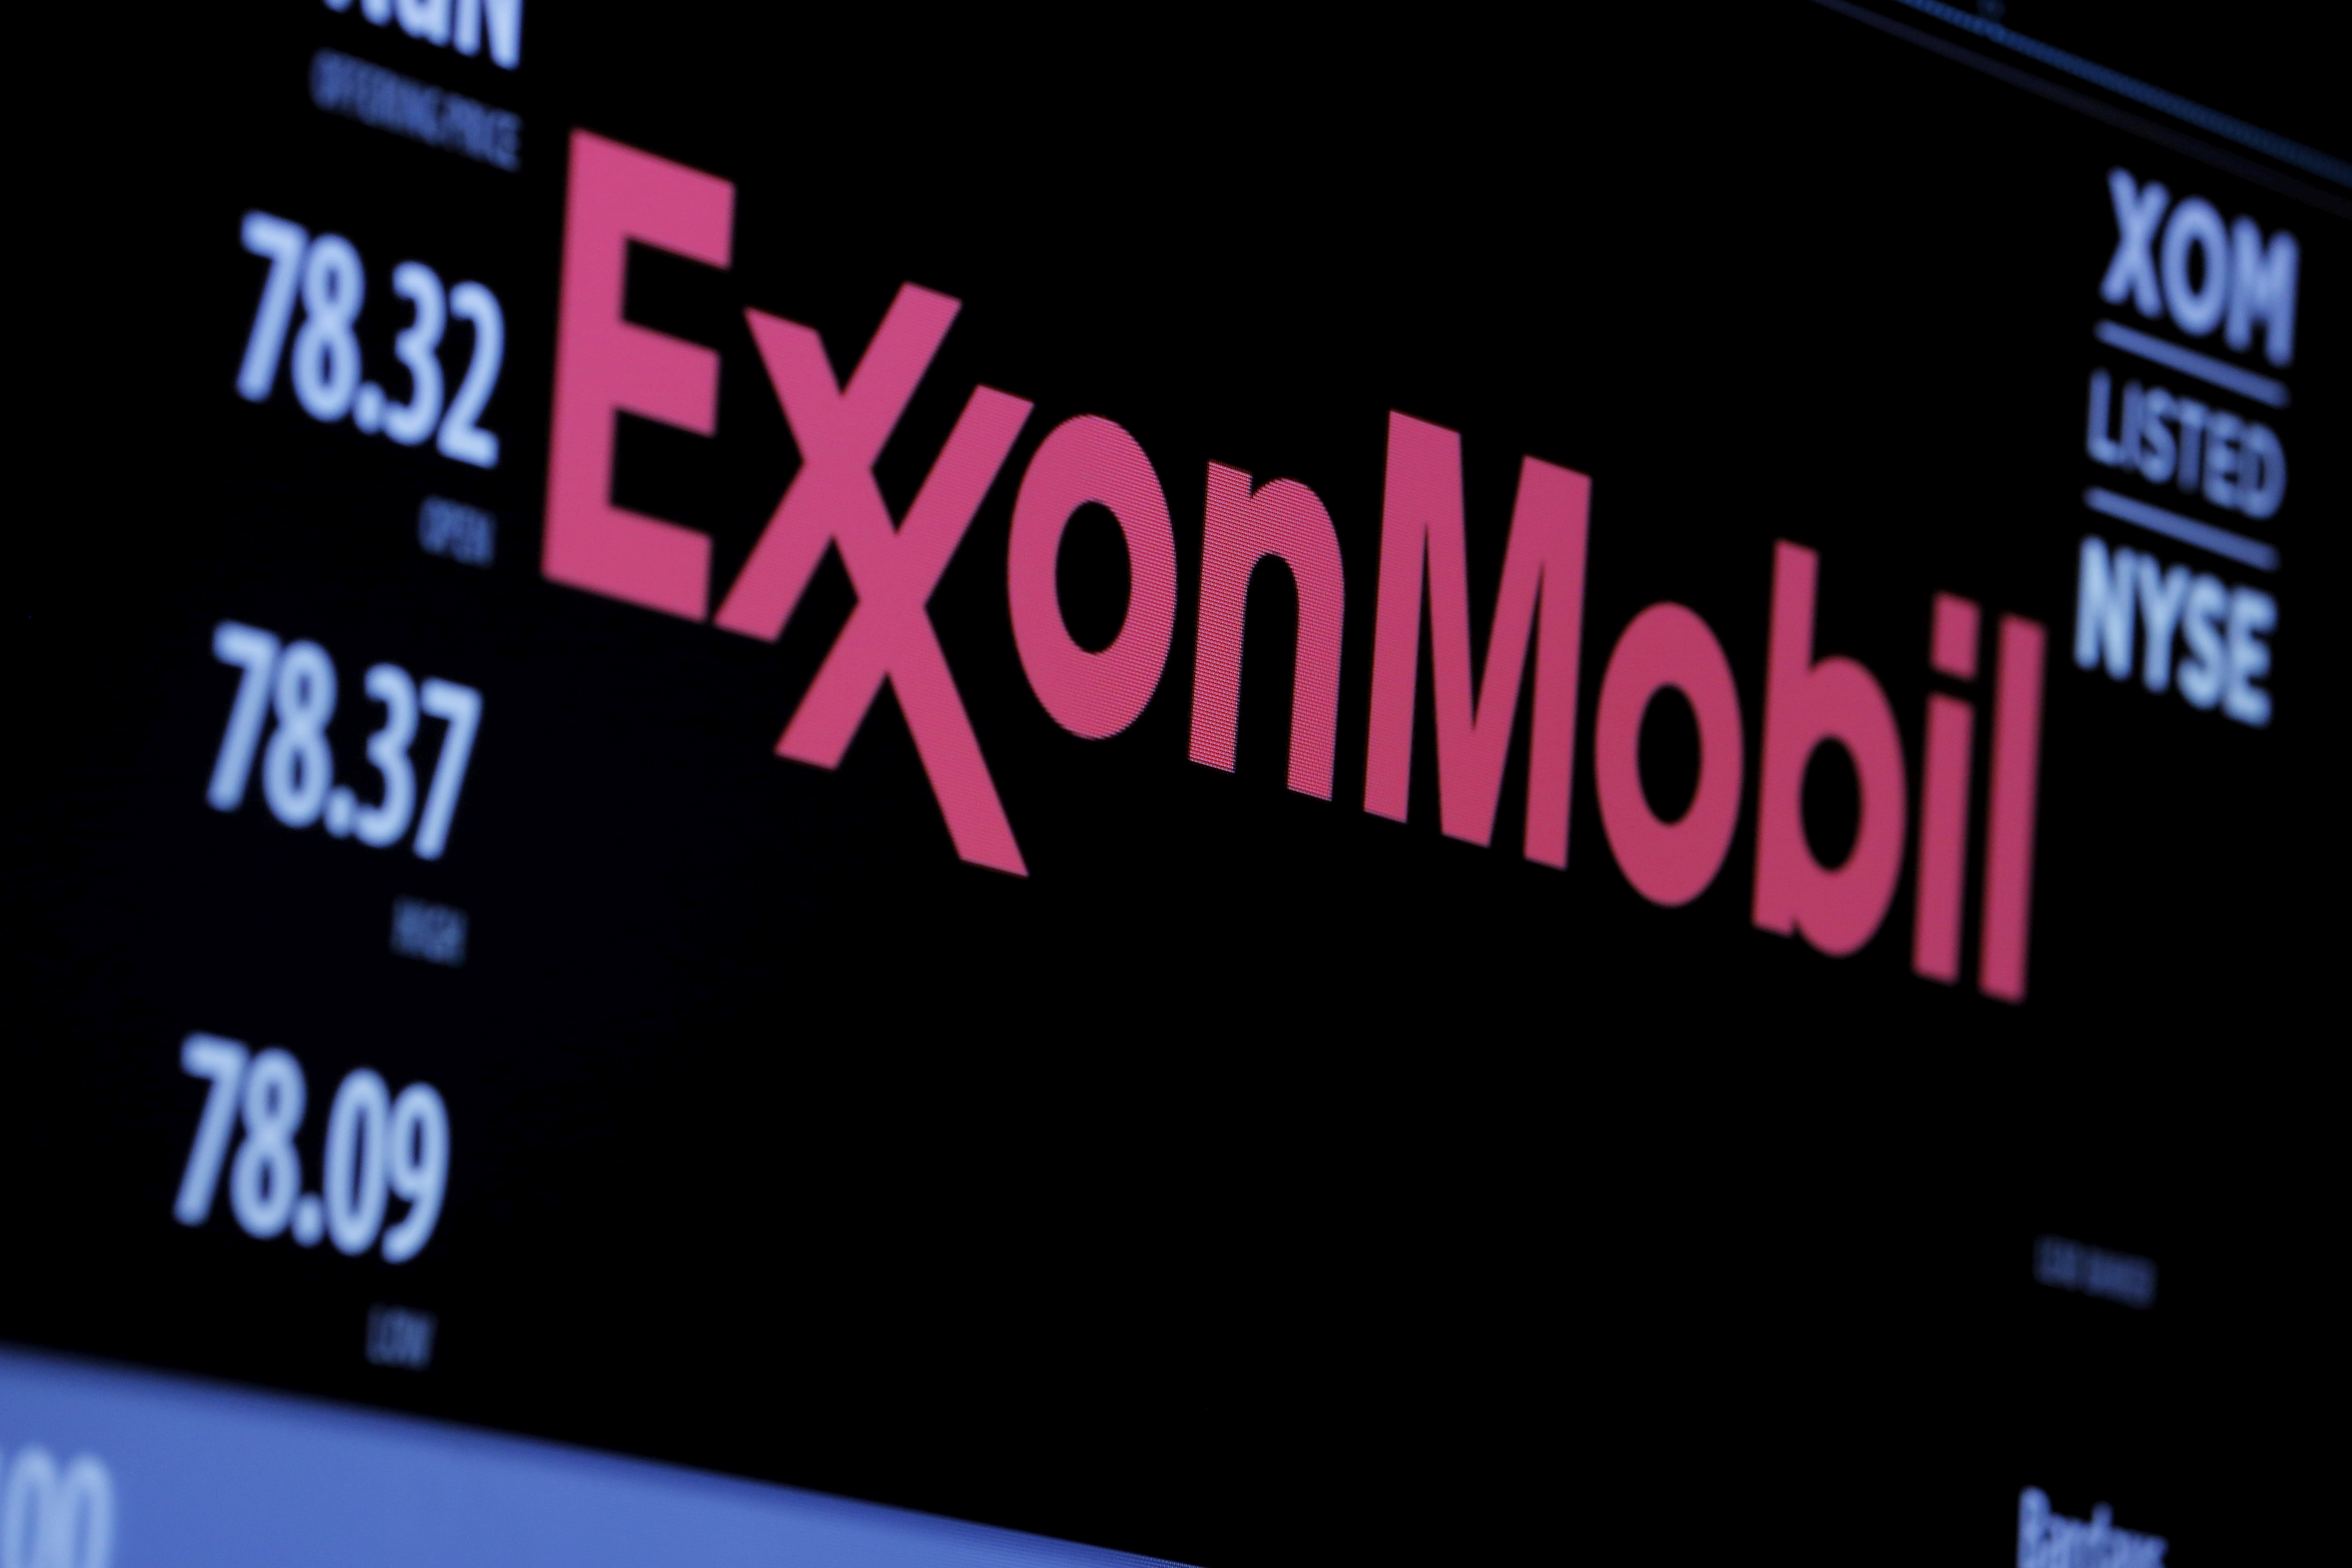 The logo of Exxon Mobil Corporation is shown on a monitor above the floor of the New York Stock Exchange in New York, December 30, 2015./File Photo/File Photo